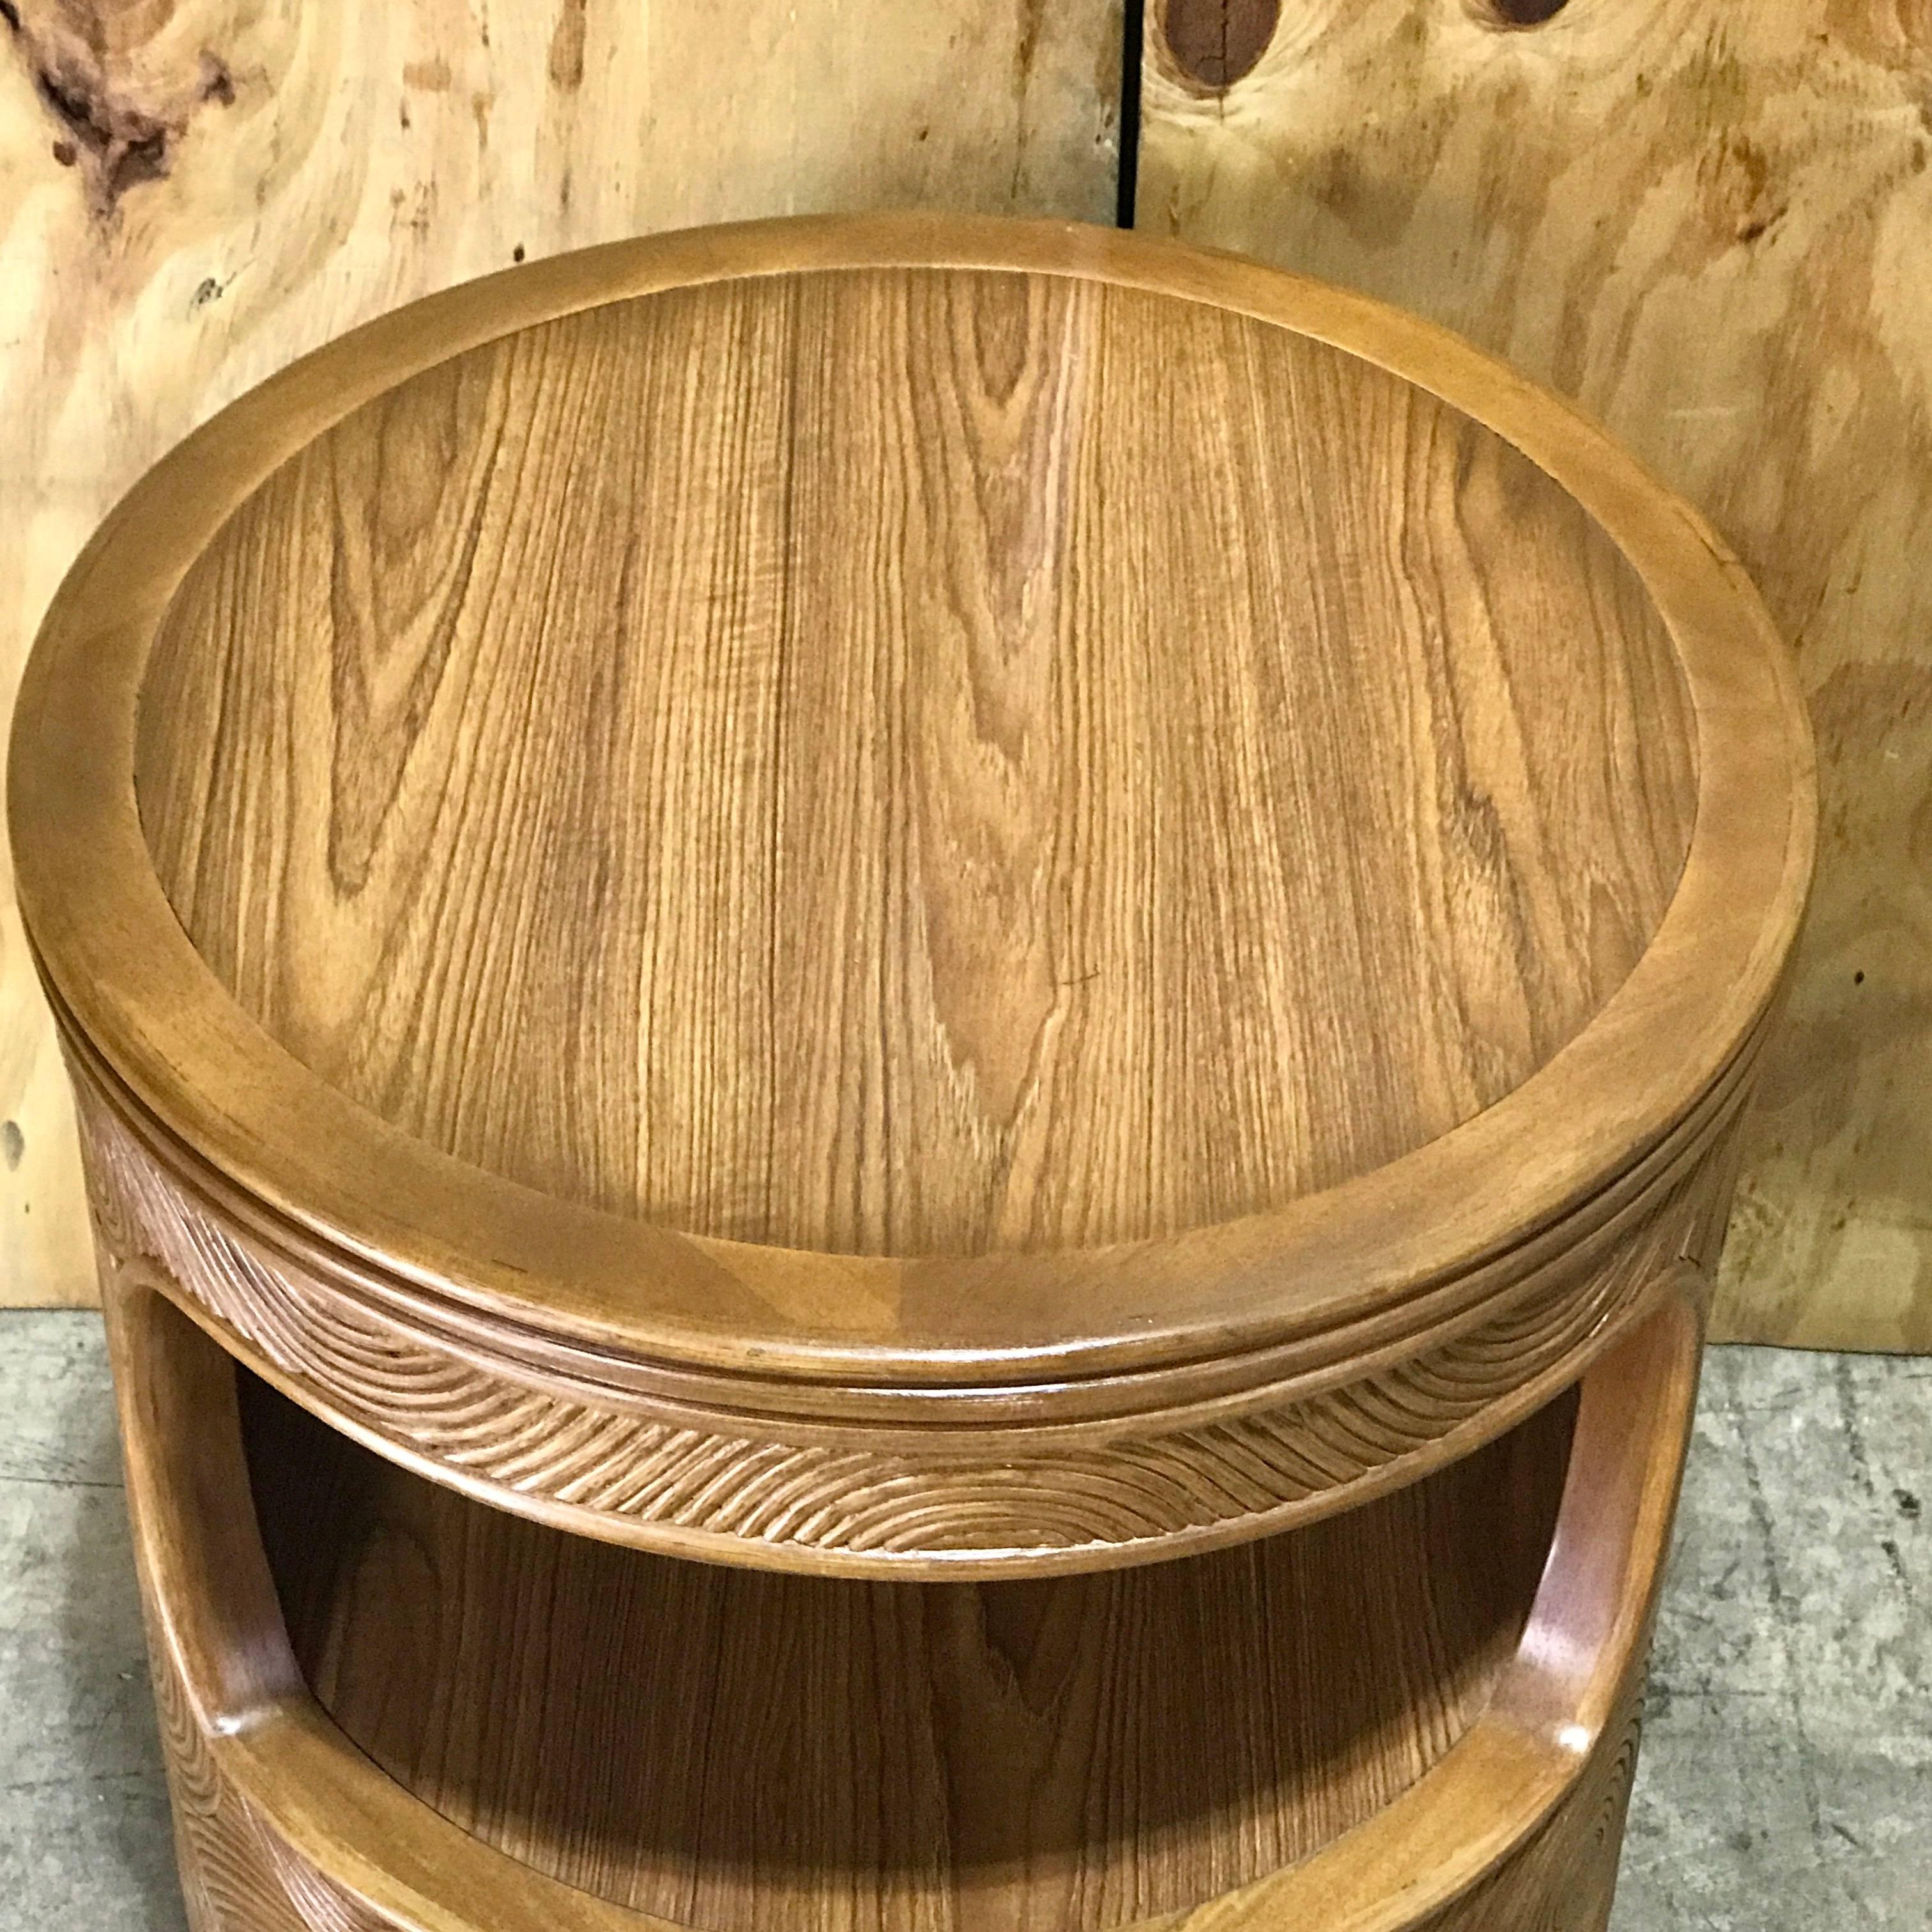 Pair of Mod bamboo and reed round end tables, in the manner of Gabriella Crespi, with lacquered tops and a second open interior shelf that measures 20" x 15".